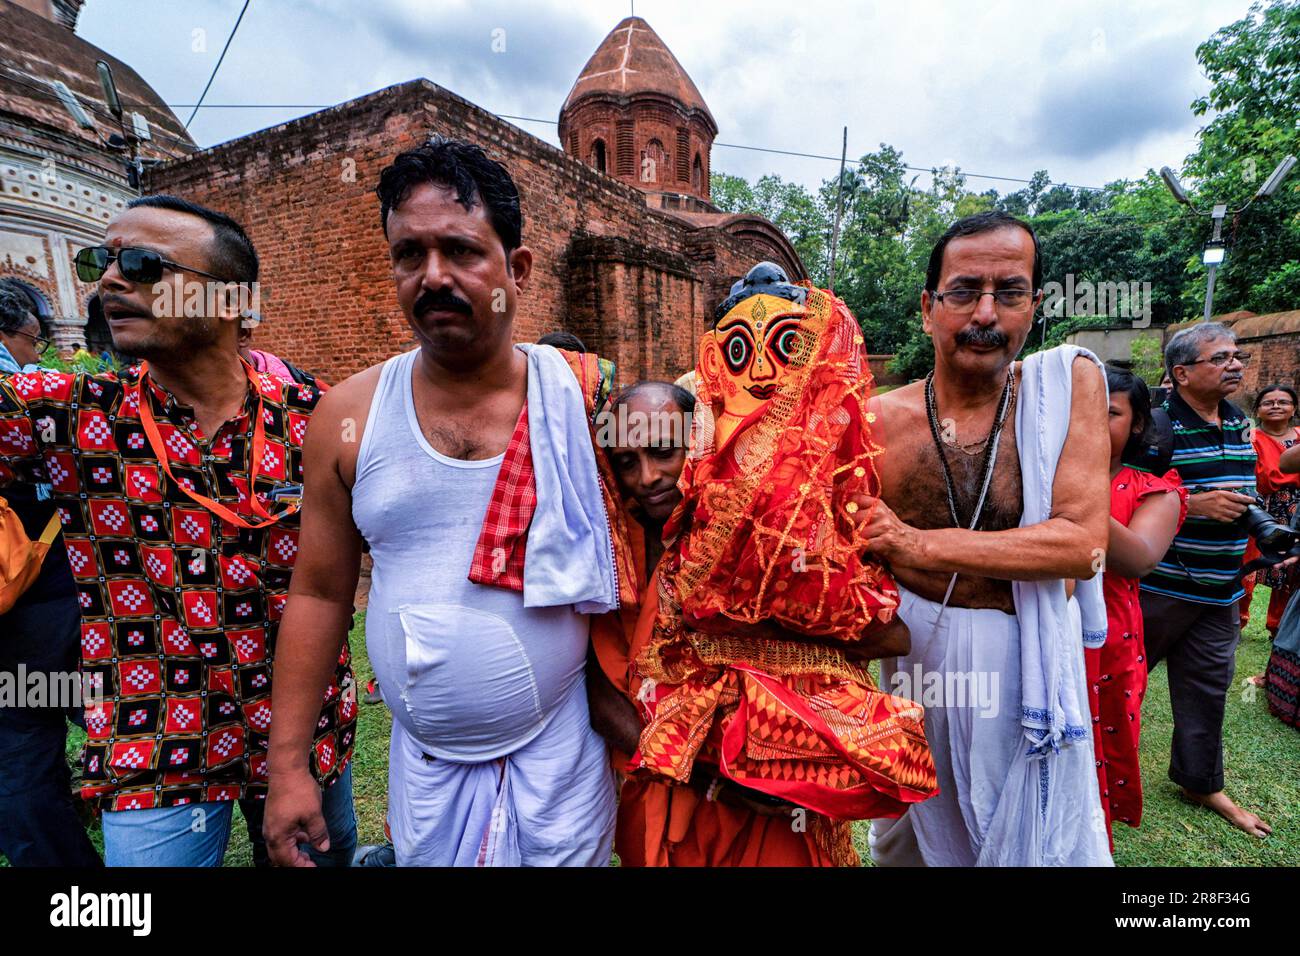 Guptipara, India. 20th June, 2023. Hindu devotees seen carrying an Idol of Lord Subhadra during the Chariot Festival/Ratha Yatra in Guptipara which is almost 100 km East from Kolkata. Ratha Yatra, also called Rathayatra, Rathajatra, or Chariot festival related to Lord Jagannath, is celebrated throughout the World as per Hindu Mythology. Rathayatra is a journey in a chariot of Lord Jagannath accompanied by the public celebrated annually. Dozens of faithful gathered to witness the festival. (Photo by Avishek Das/SOPA Images/Sipa USA) Credit: Sipa USA/Alamy Live News Stock Photo